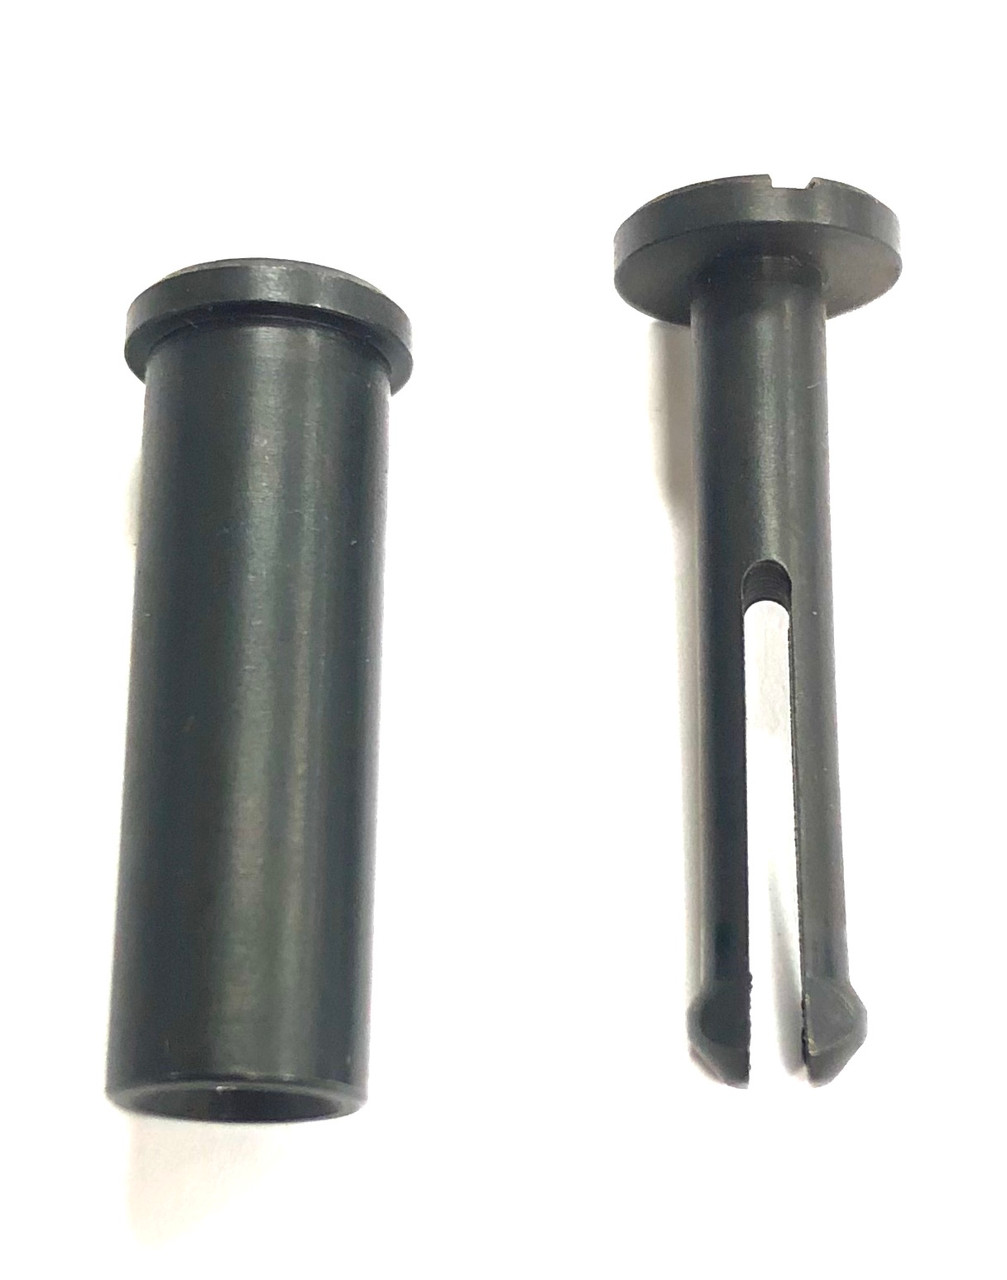 MG34 and MG42 Trigger Housing Pins (1 male, 1 female) - Newly Made